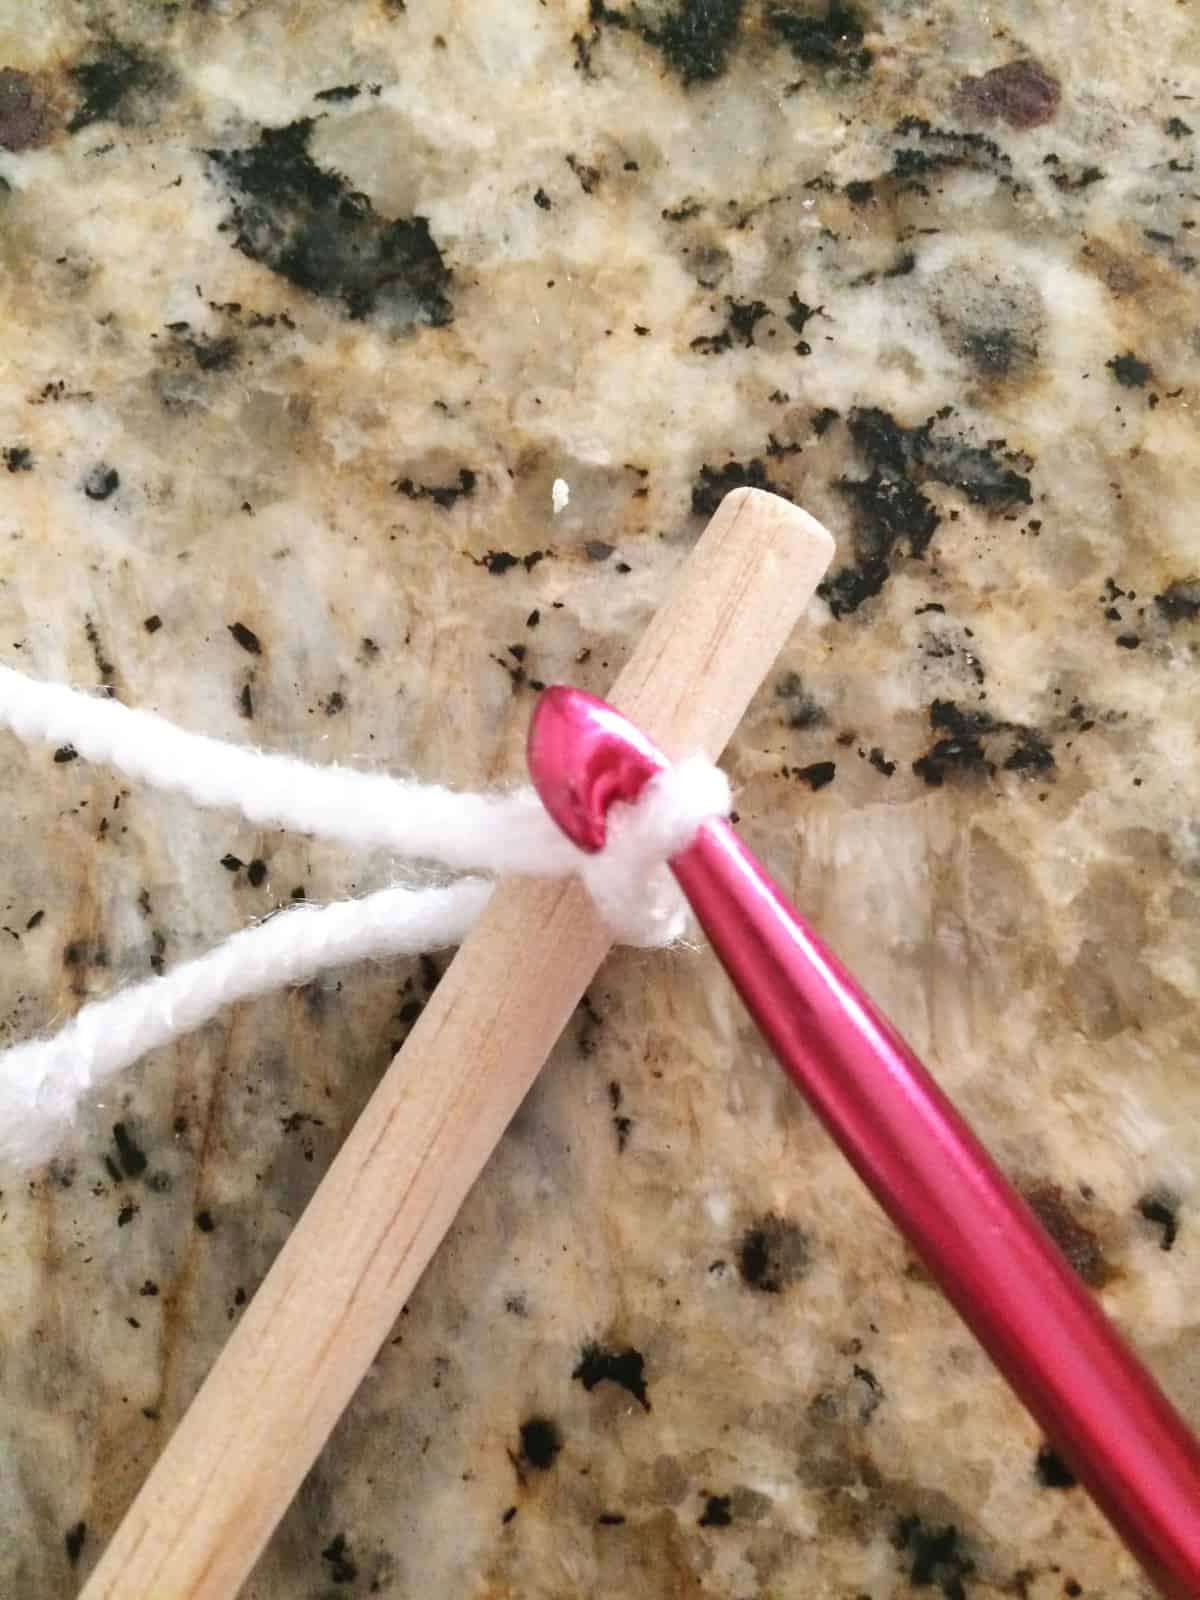 Slip knot on to dowel.